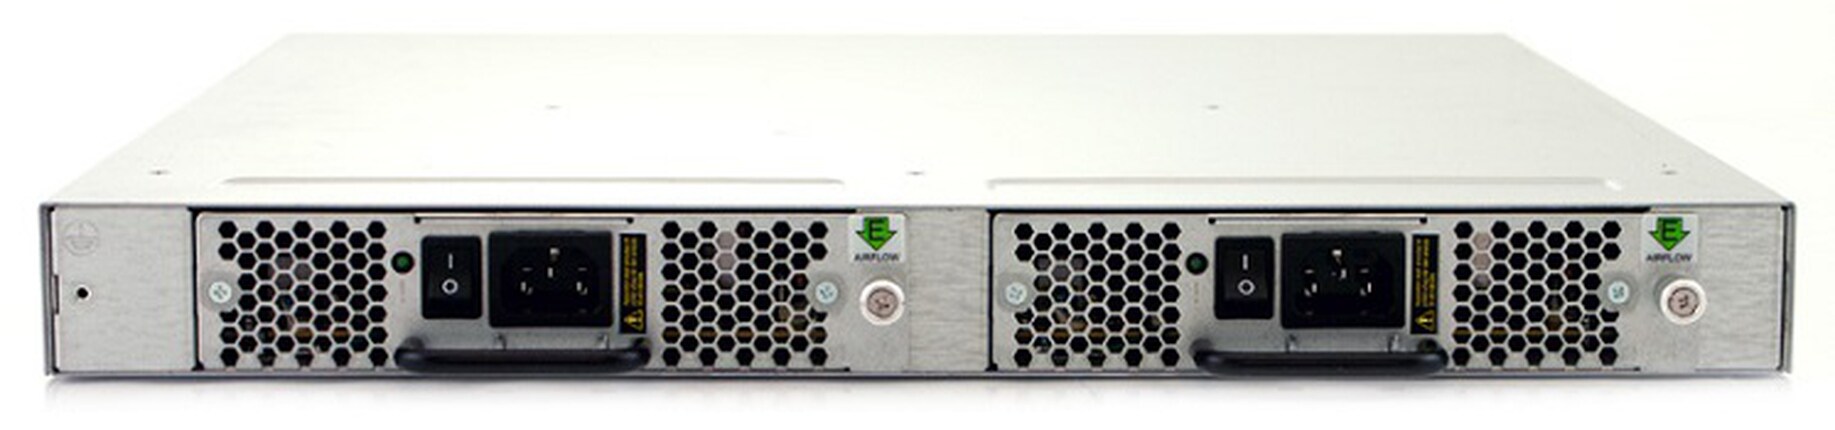 Brocade RPS9DC+I 500W DC Power Supply with Intake Airflow